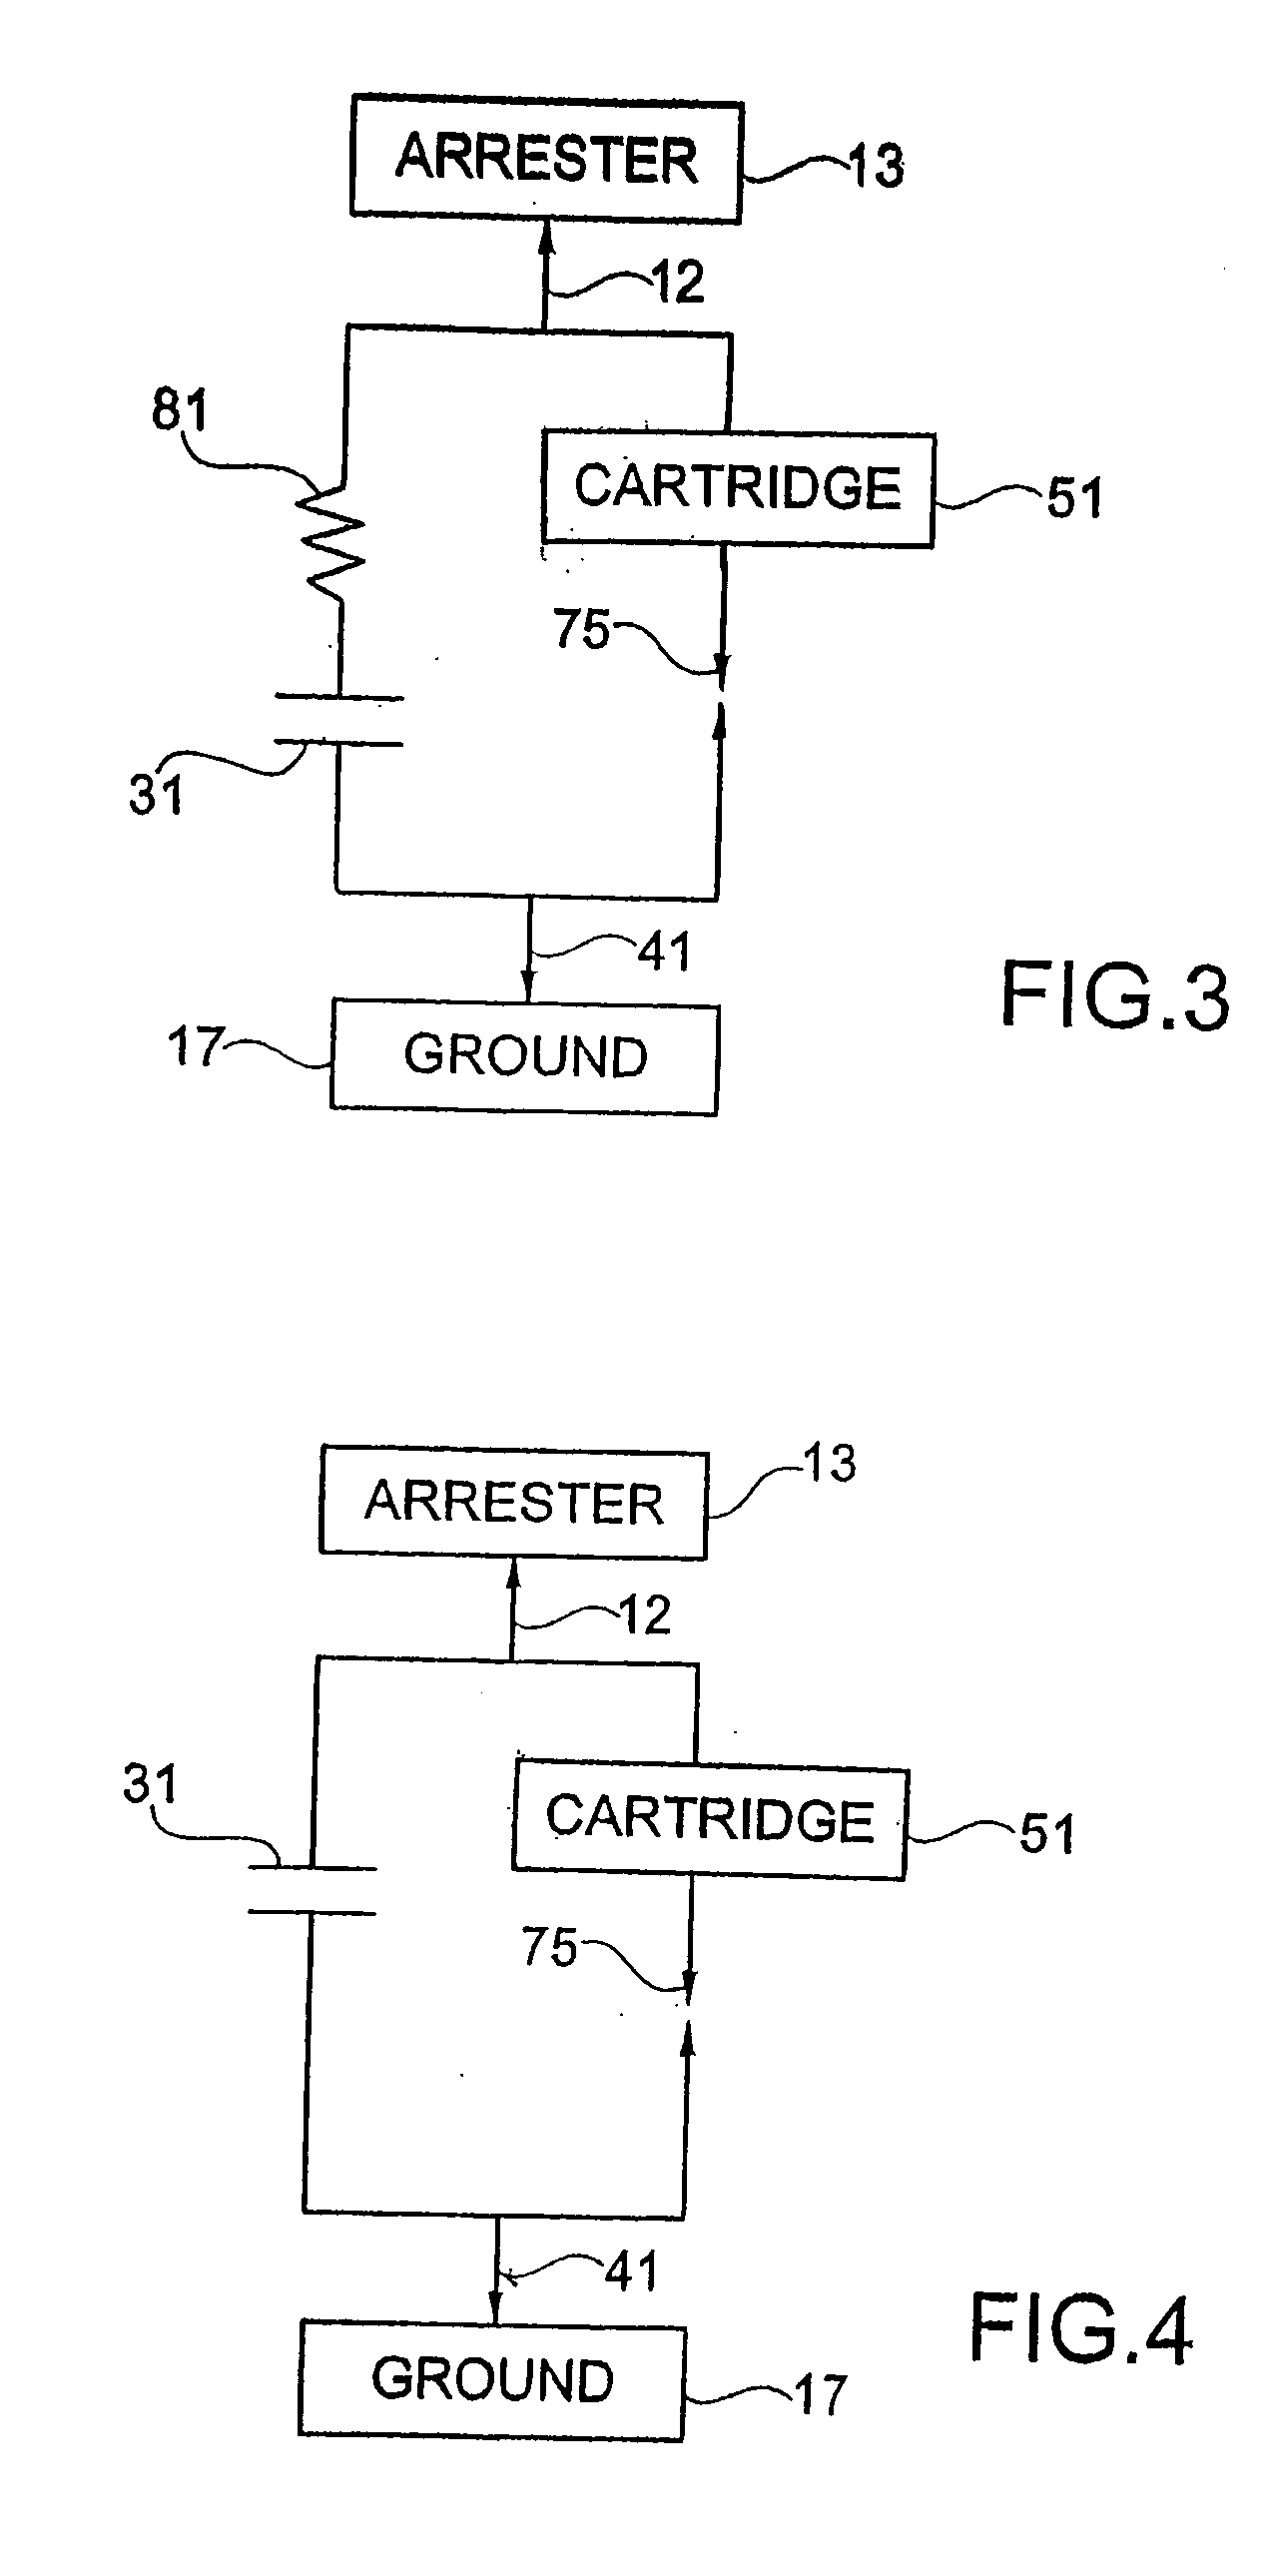 Arrester disconnector assembly having a capacitor